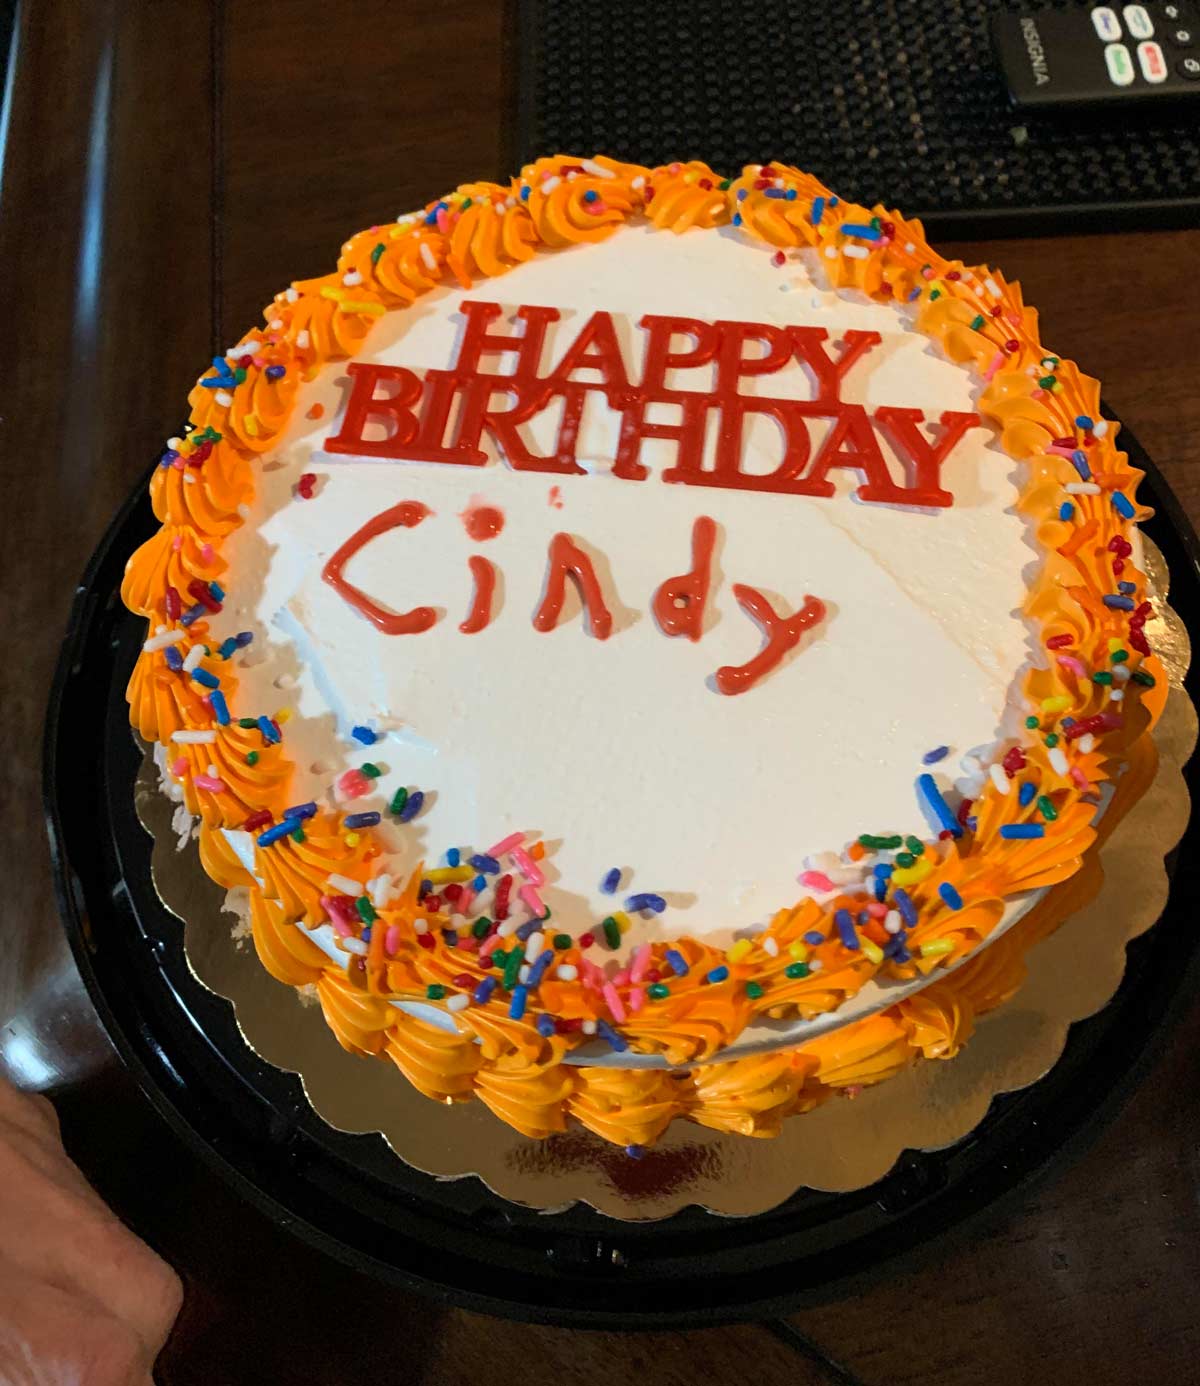 Neighbor purchased generic birthday cake for his wife. Asked the deli lady if she could put her name on it. She replied "Yes, but I’m not the greatest at cake decorating" She wasn’t kidding...